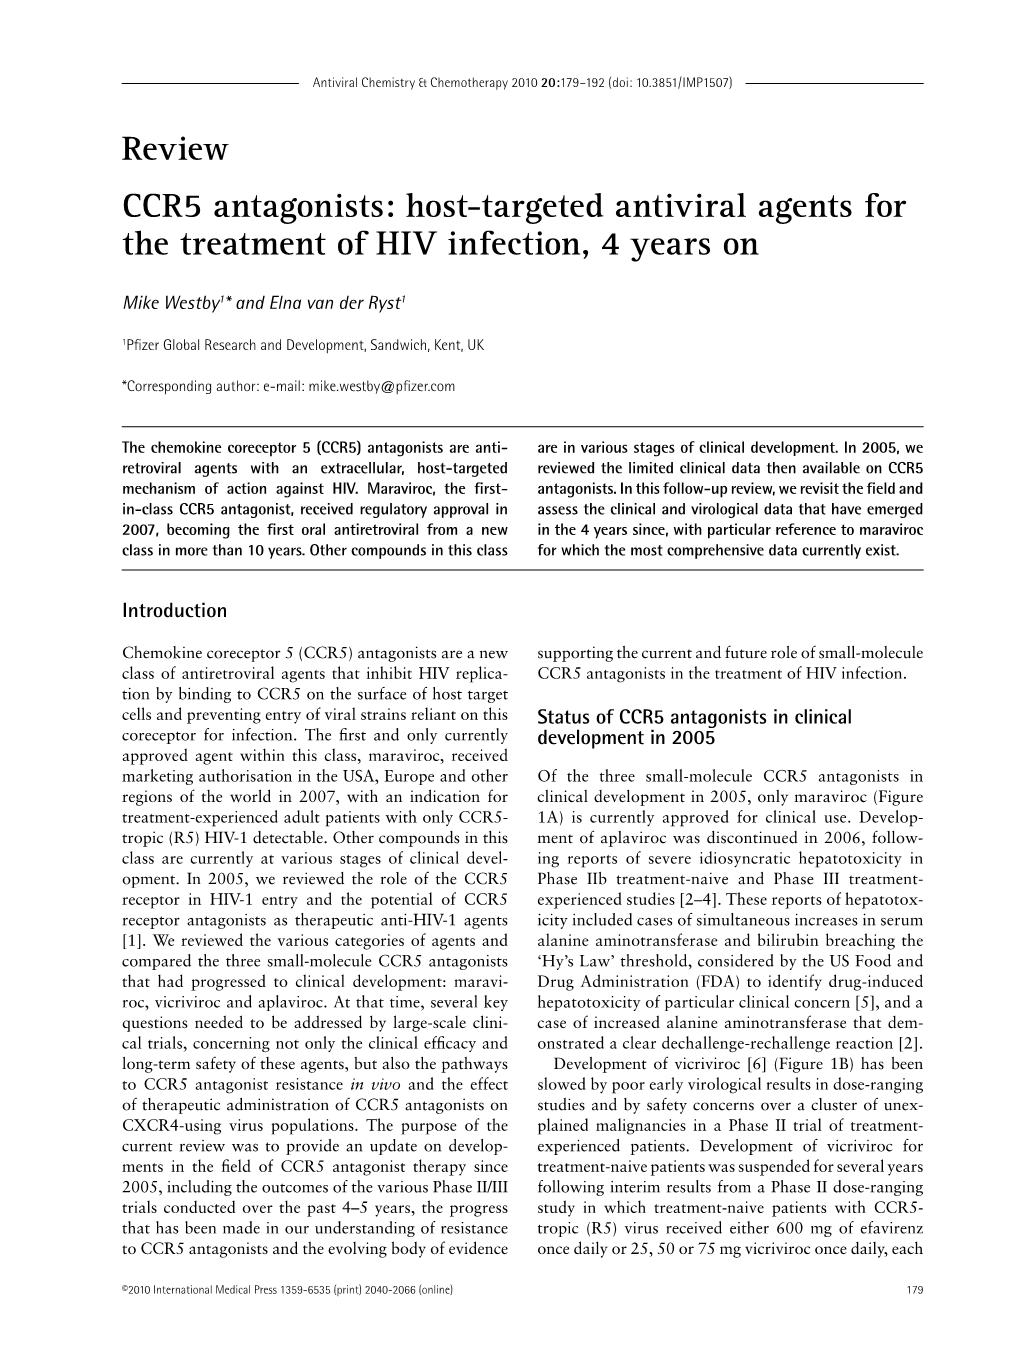 Review CCR5 Antagonists: Host-Targeted Antiviral Agents for the Treatment of HIV Infection, 4 Years On